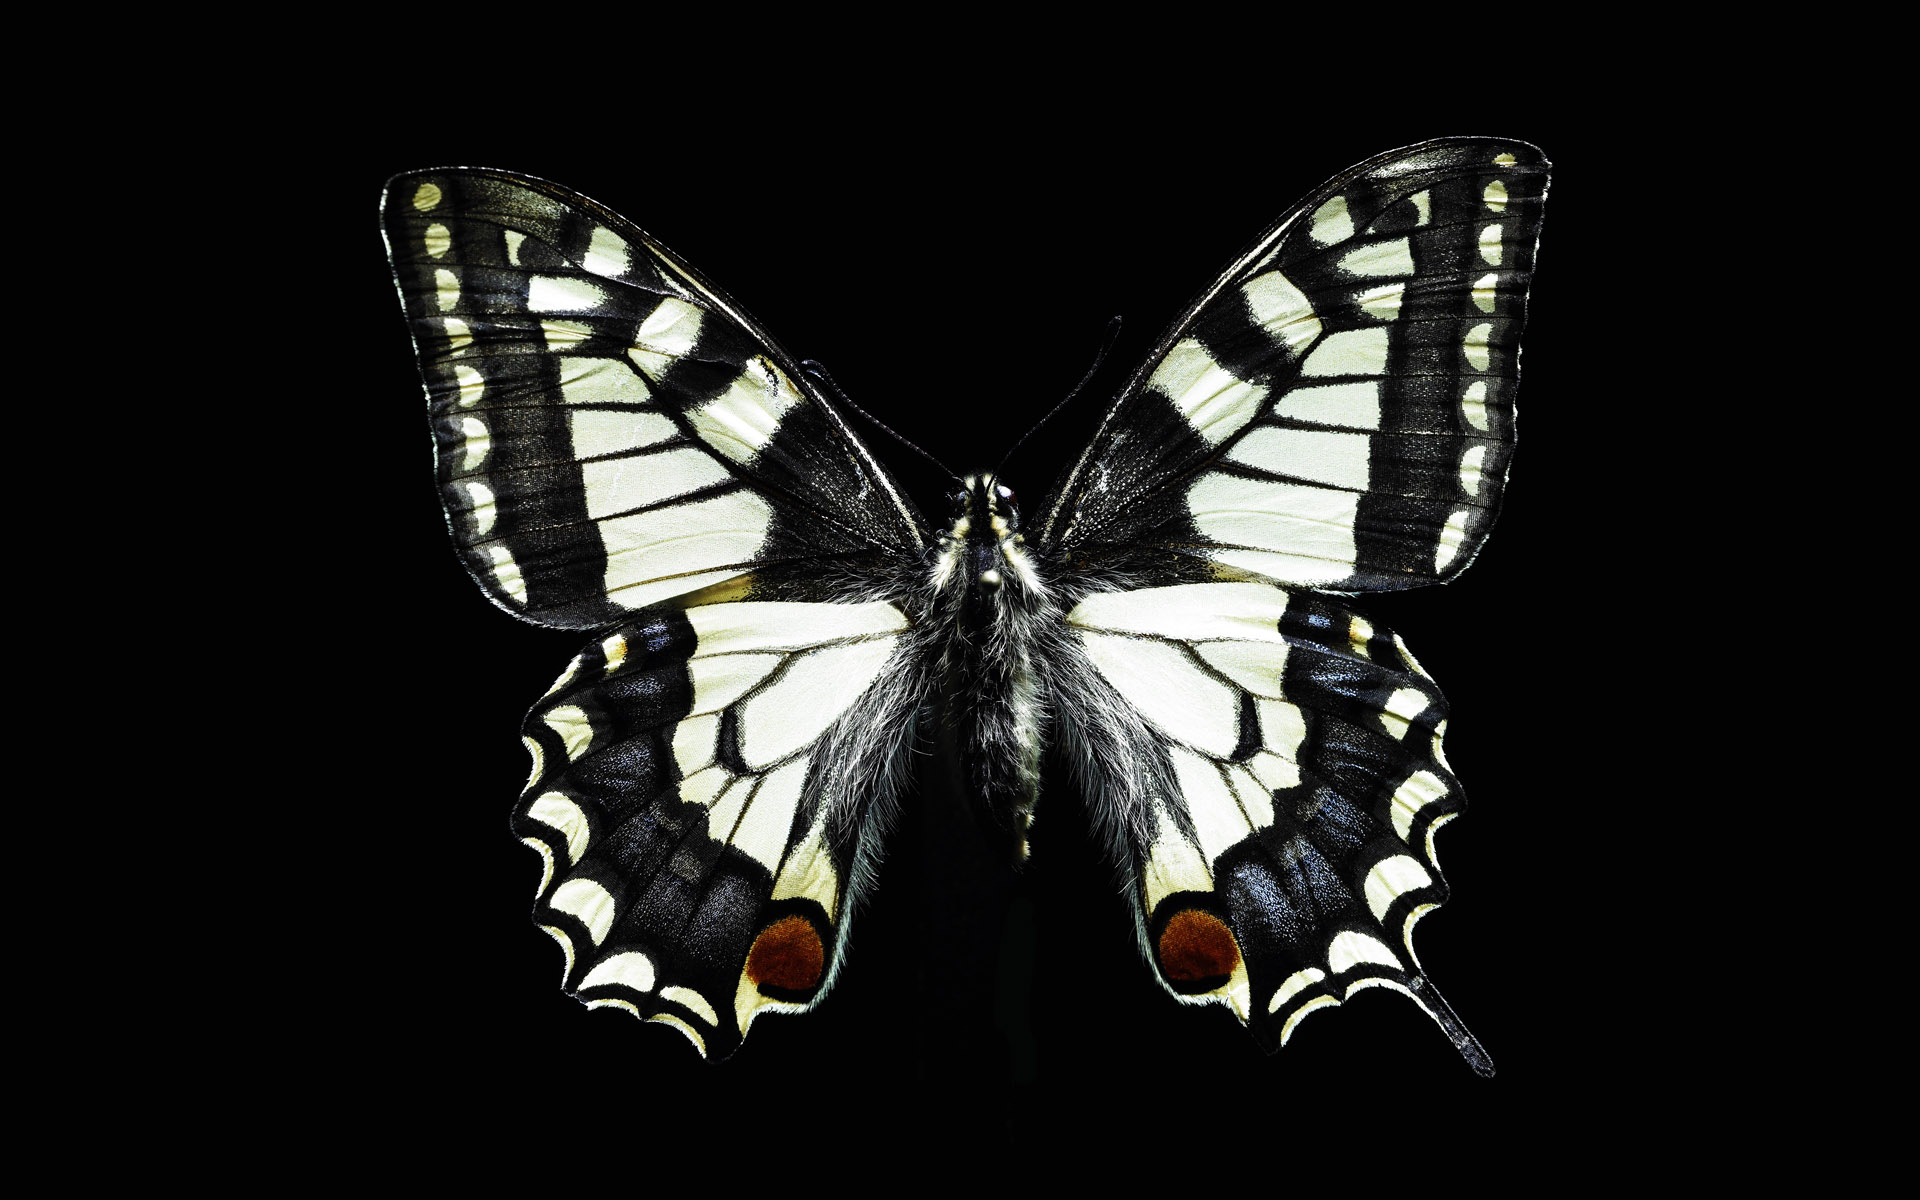 Clip Arts Related To : Butterfly Papilio Machaon. view all Black And White Butterfl...